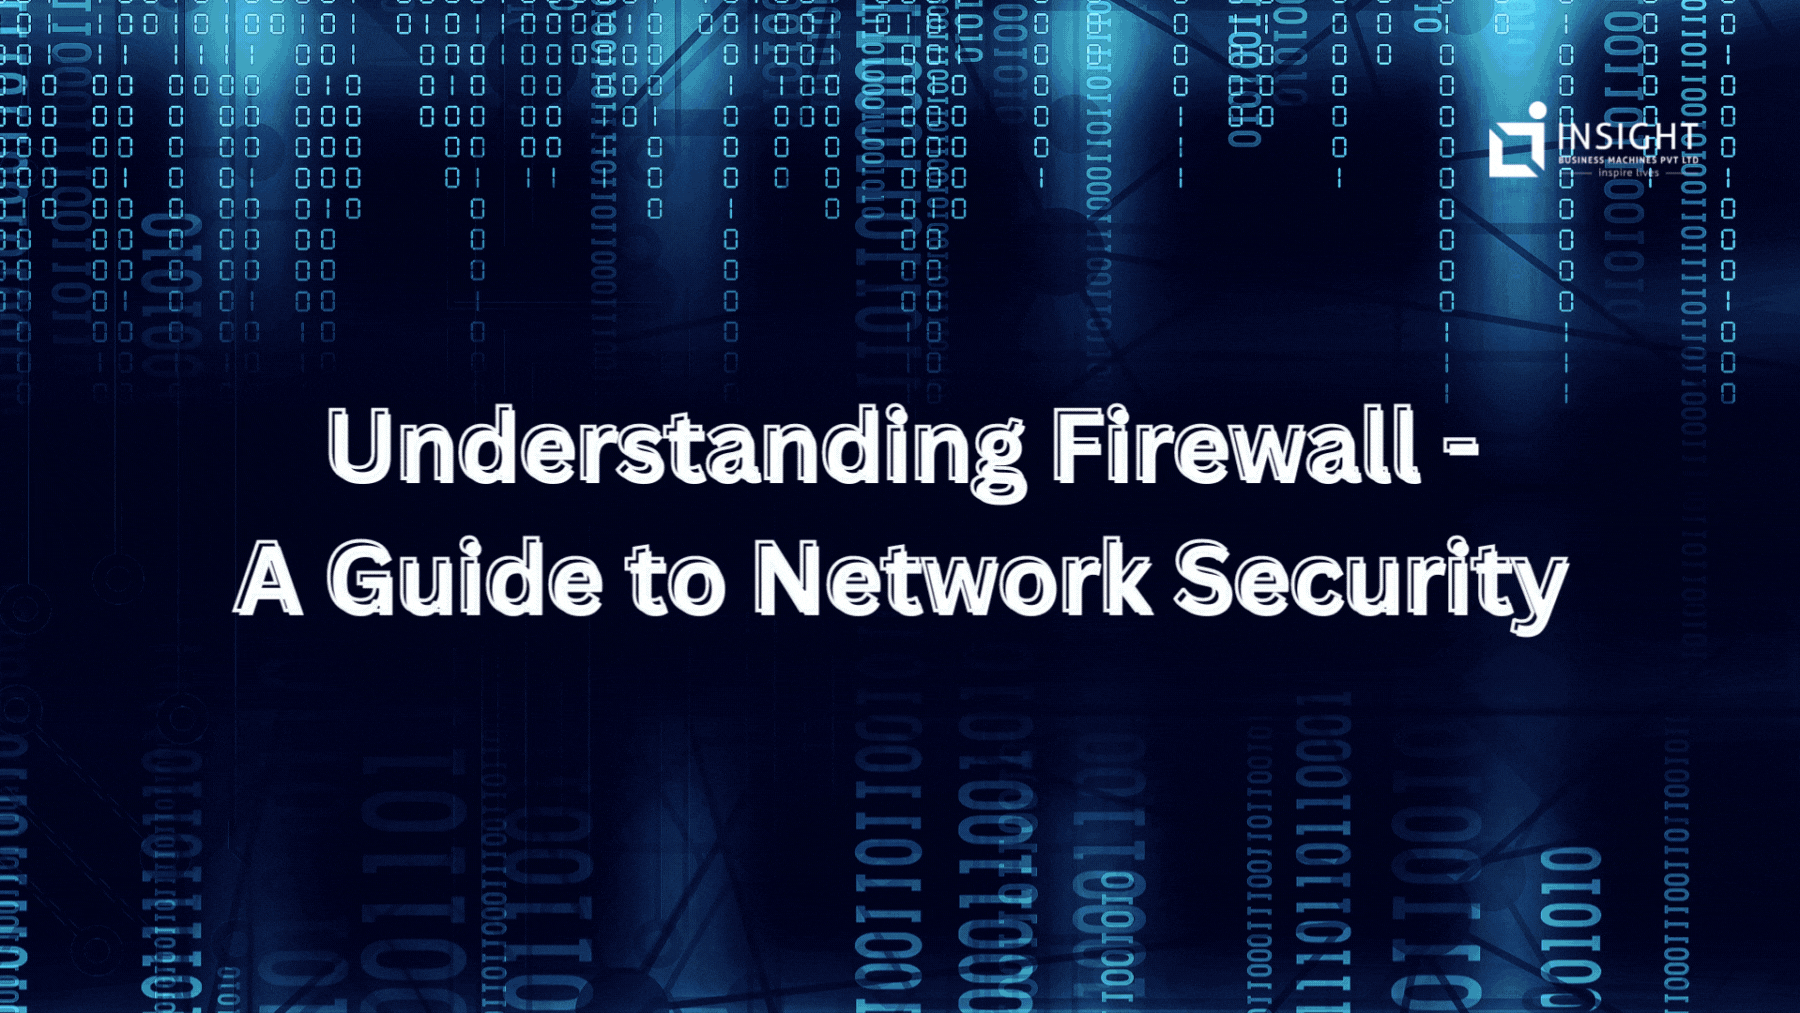 Understanding Firewall: A Guide to Network Security